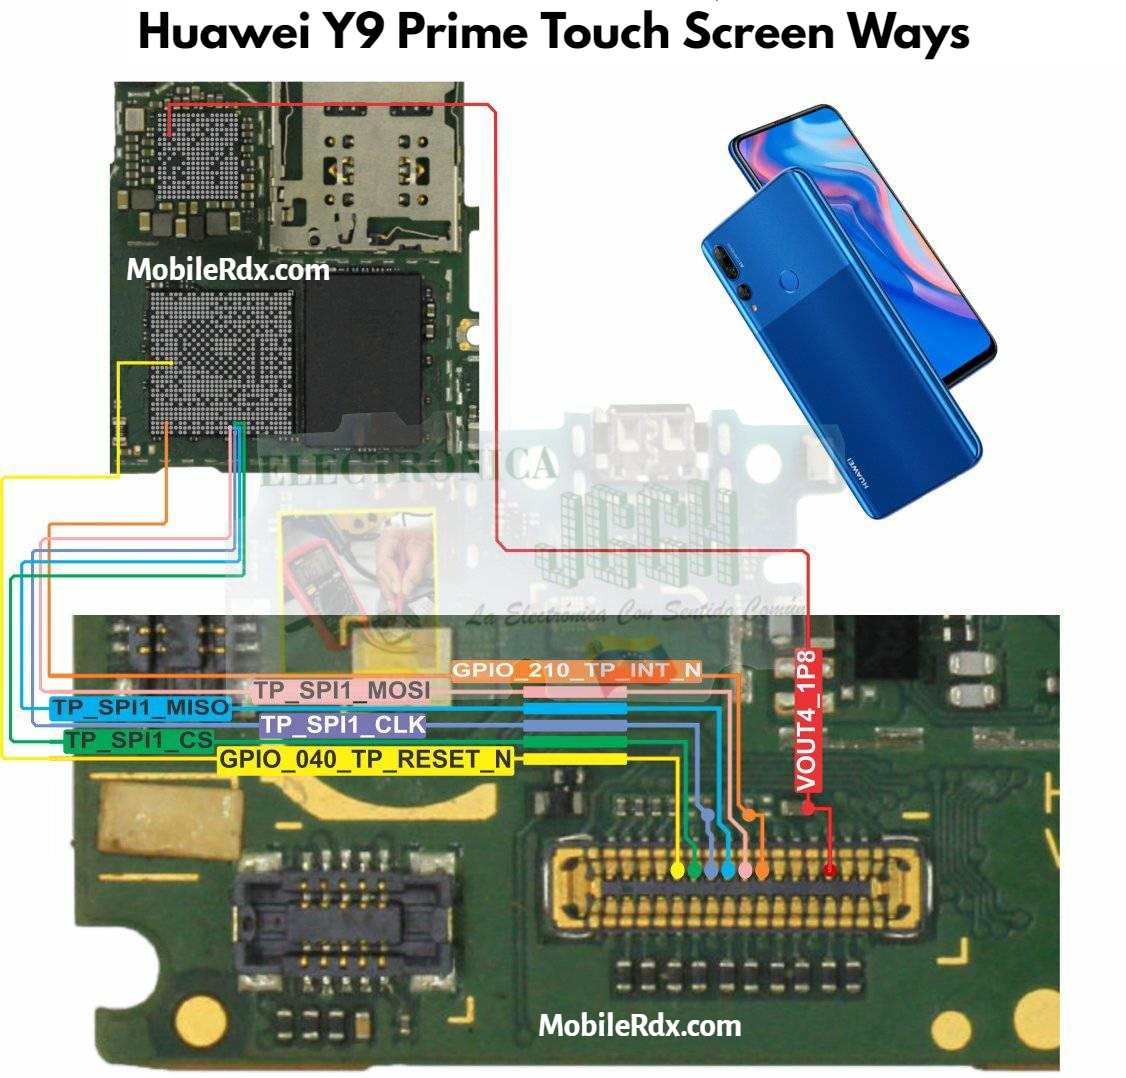 Huawei Y9 Prime Touch Screen Ways Repair Touch Screen Problem